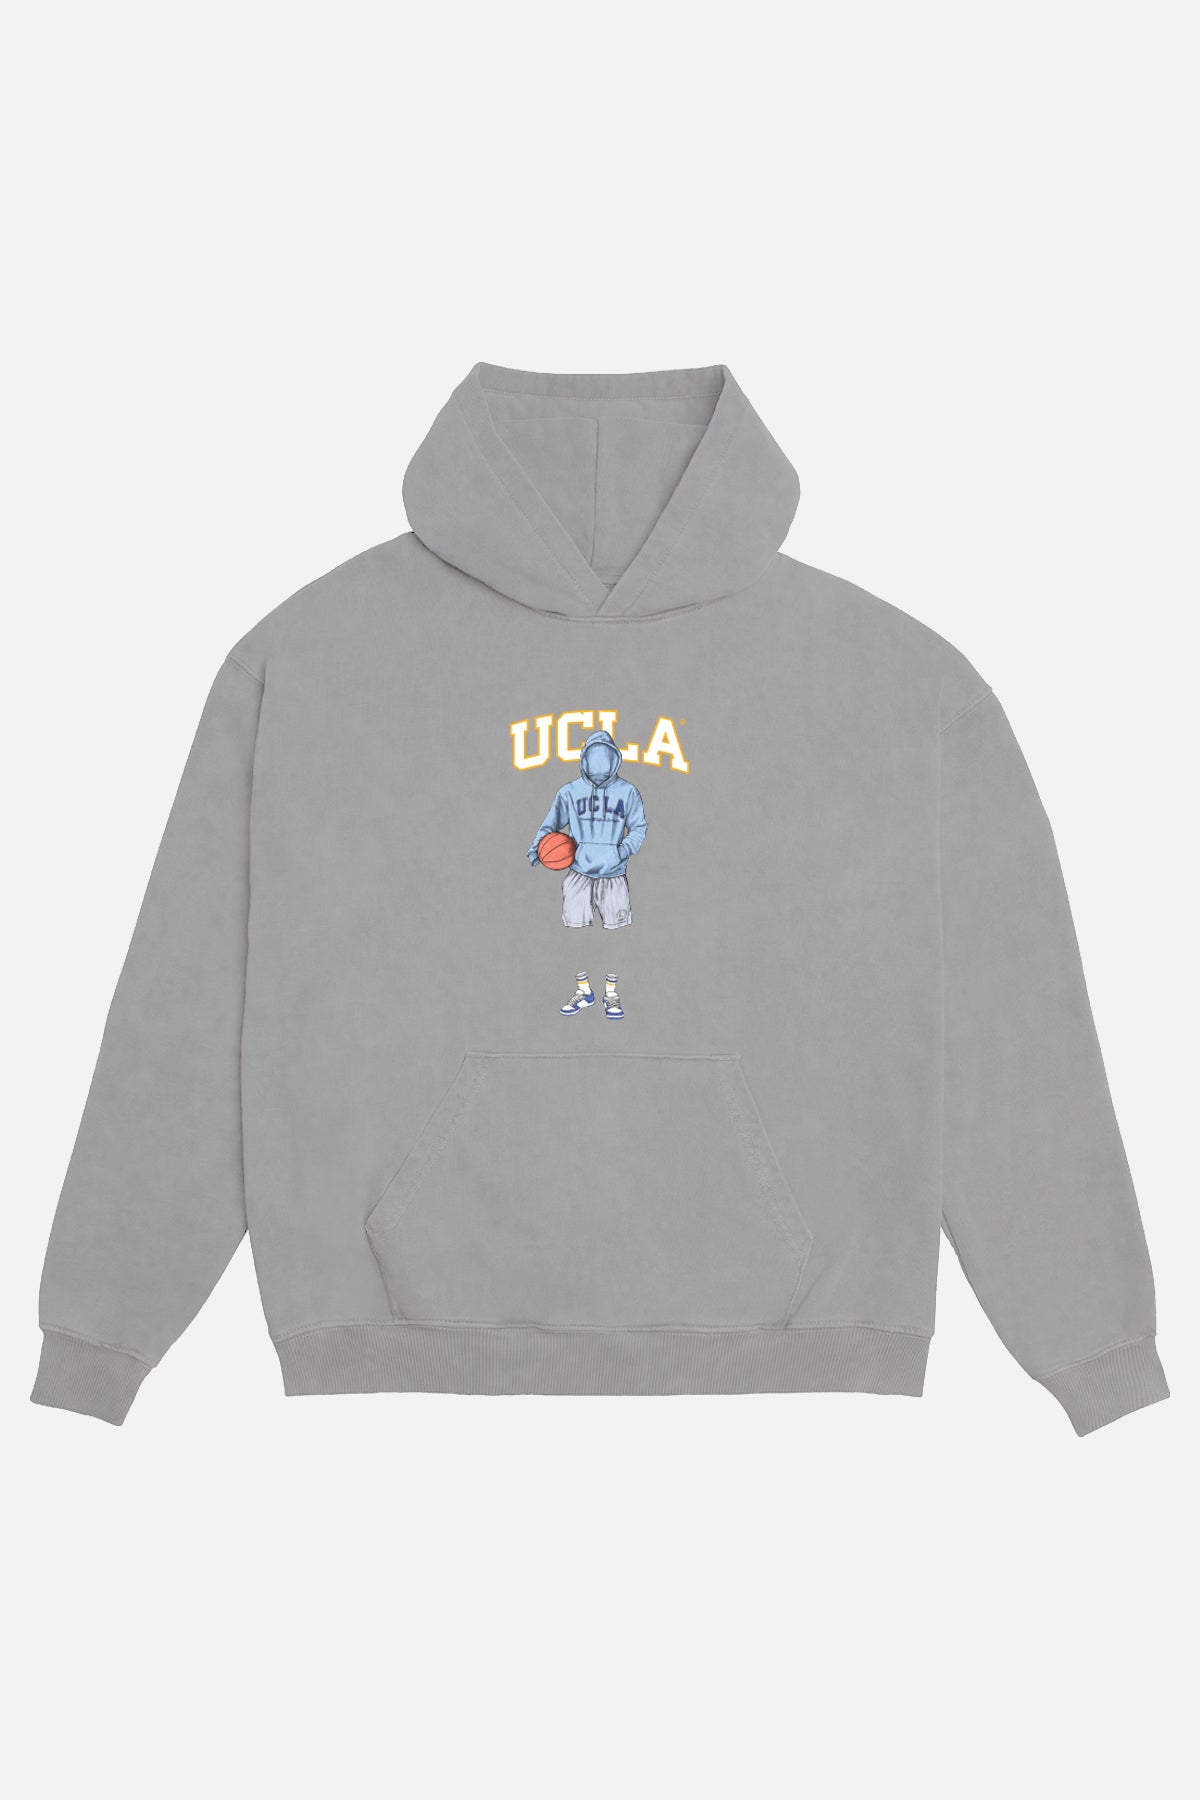 UCLA Yesterday Hoodie in Cool Grey